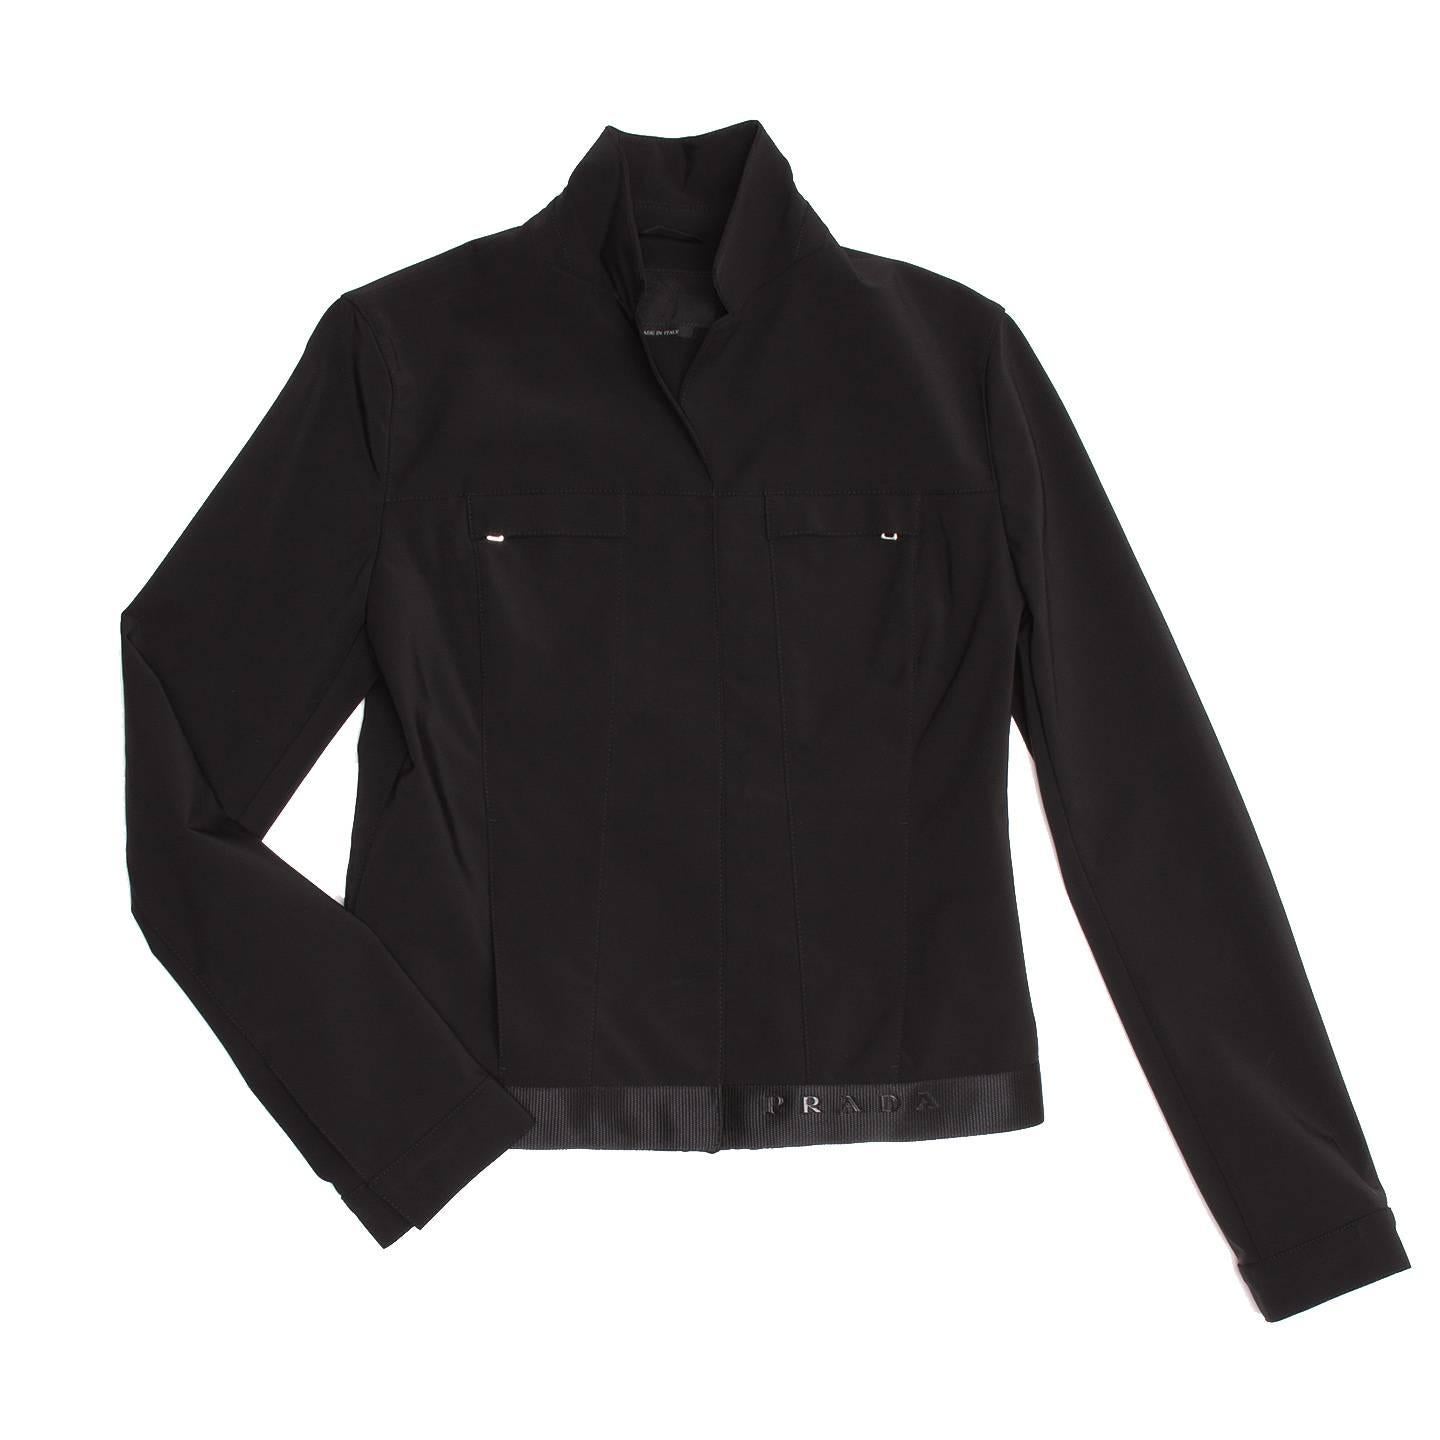 Prada Black Poly Nylon Jacket In Excellent Condition For Sale In Brooklyn, NY